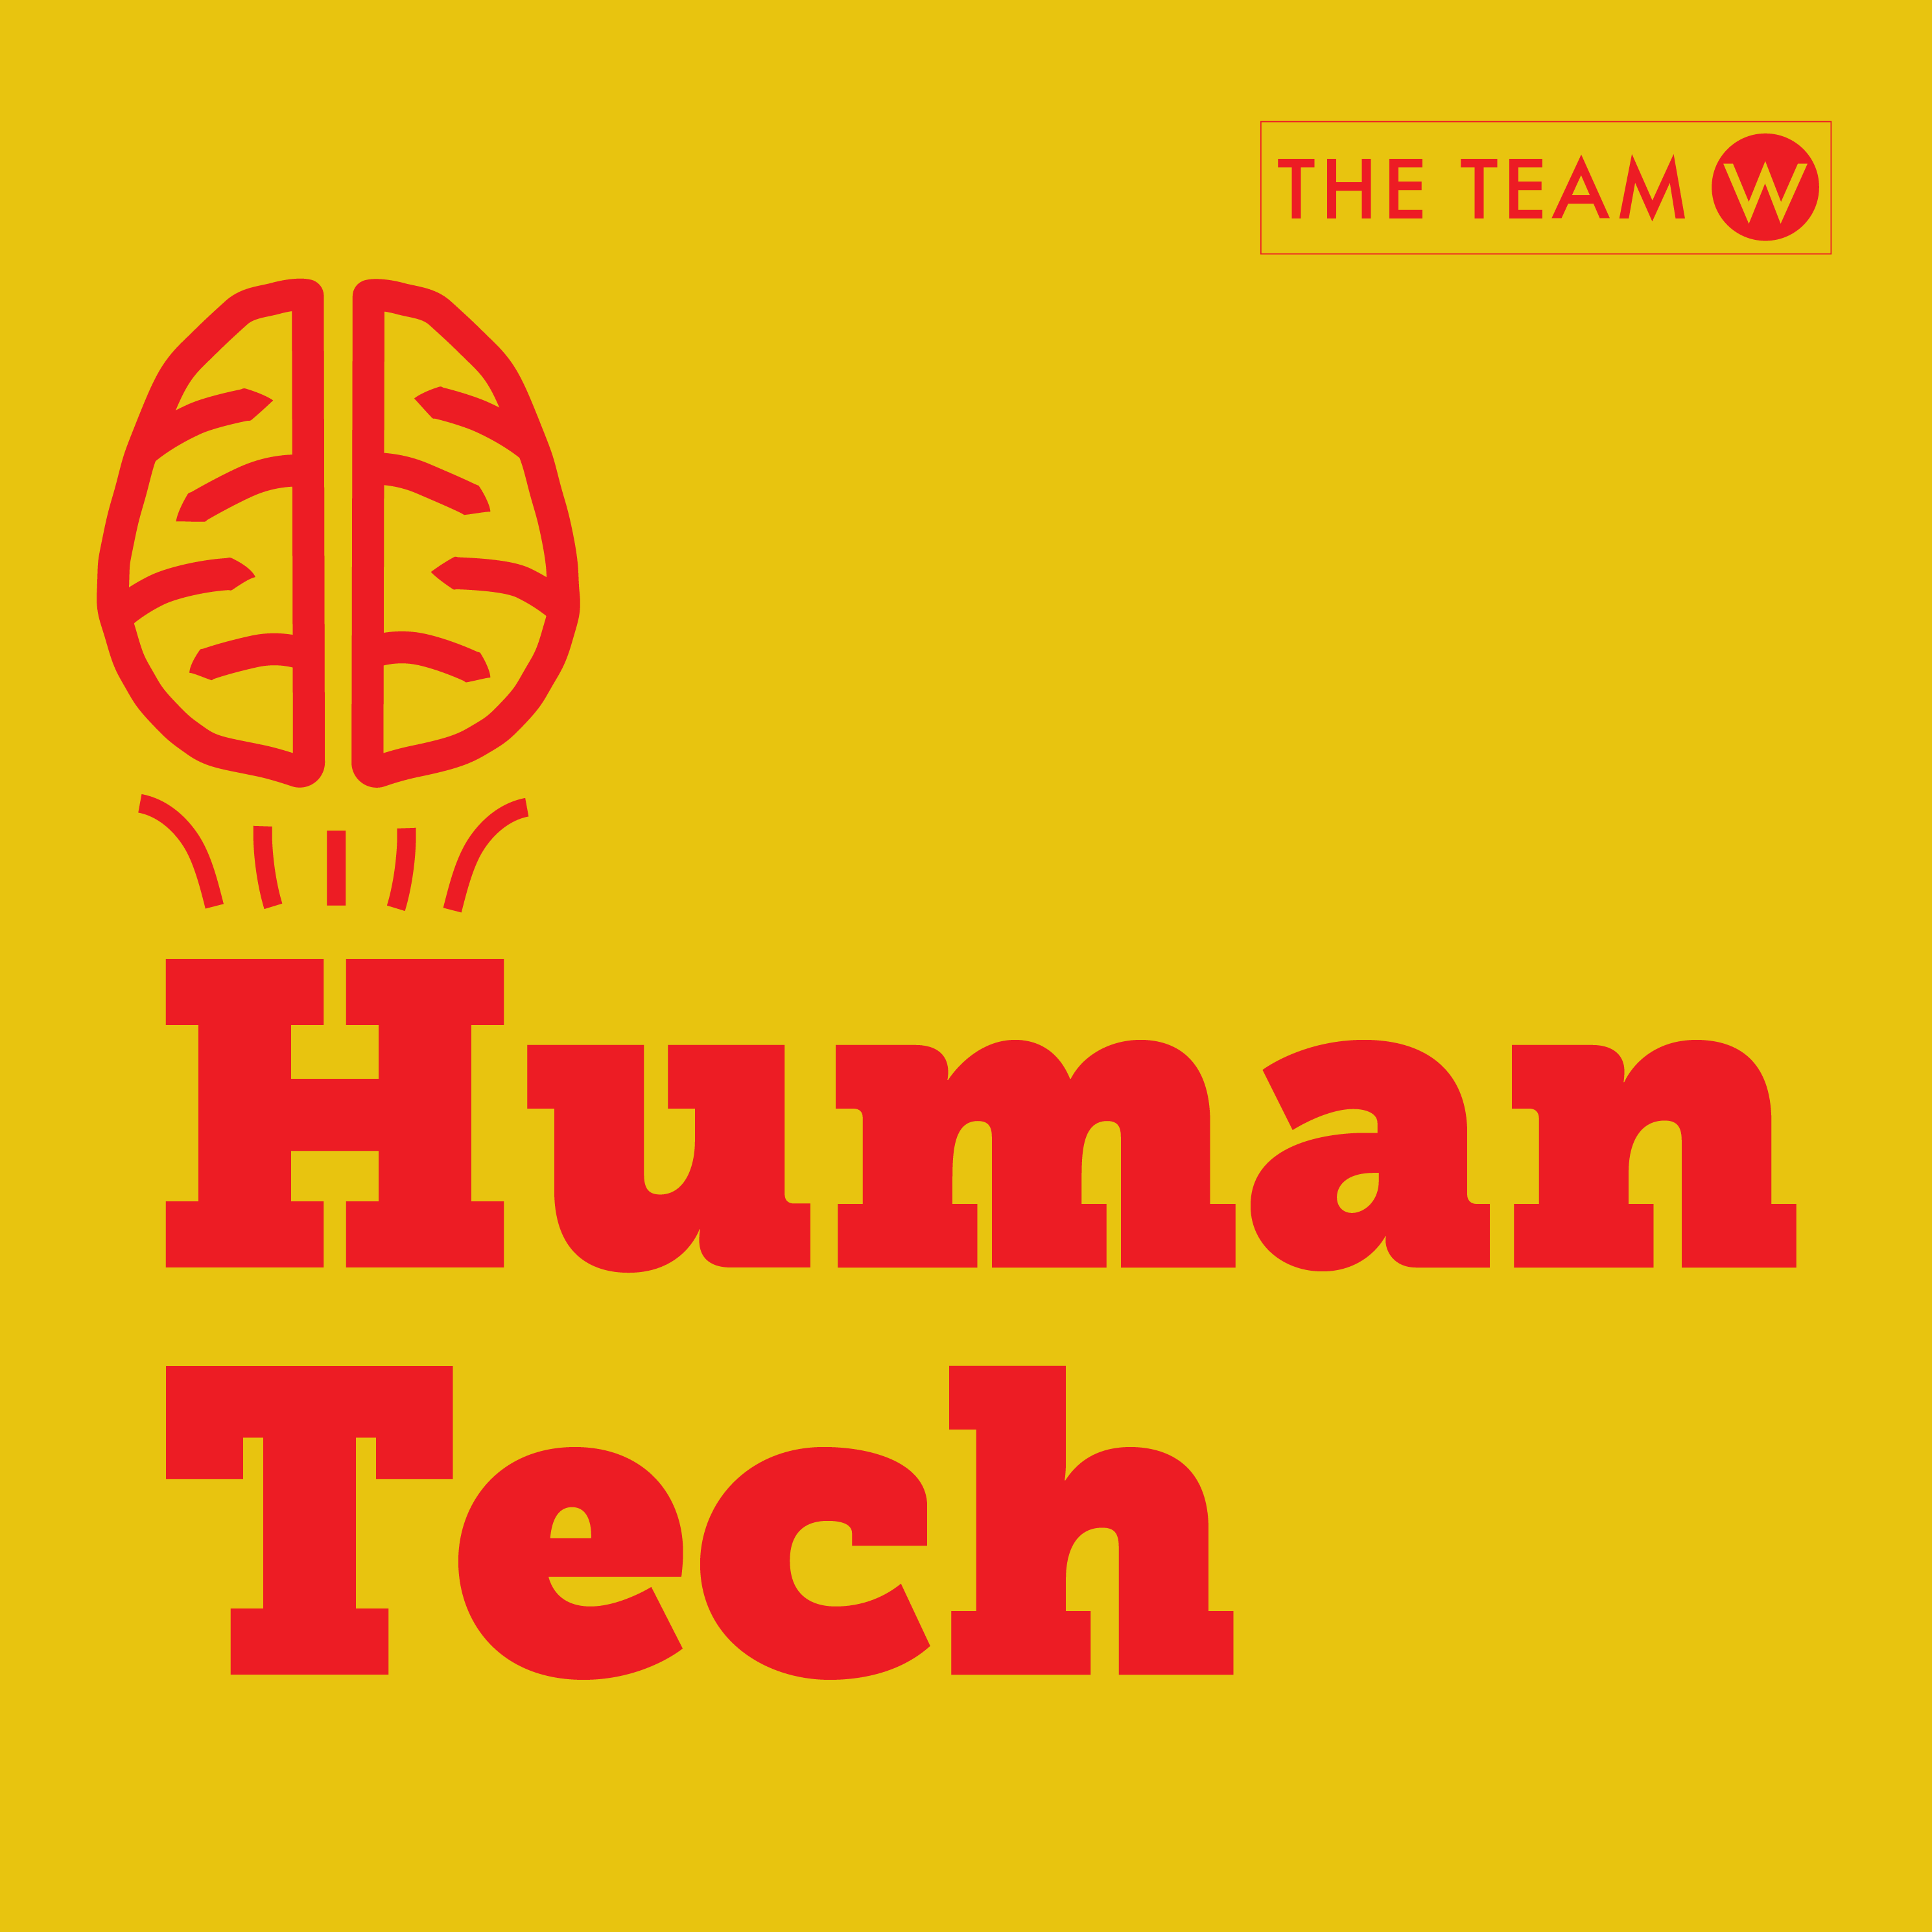 We Overestimate Our Own Knowledge, the latest episode on the Human Tech Podcast